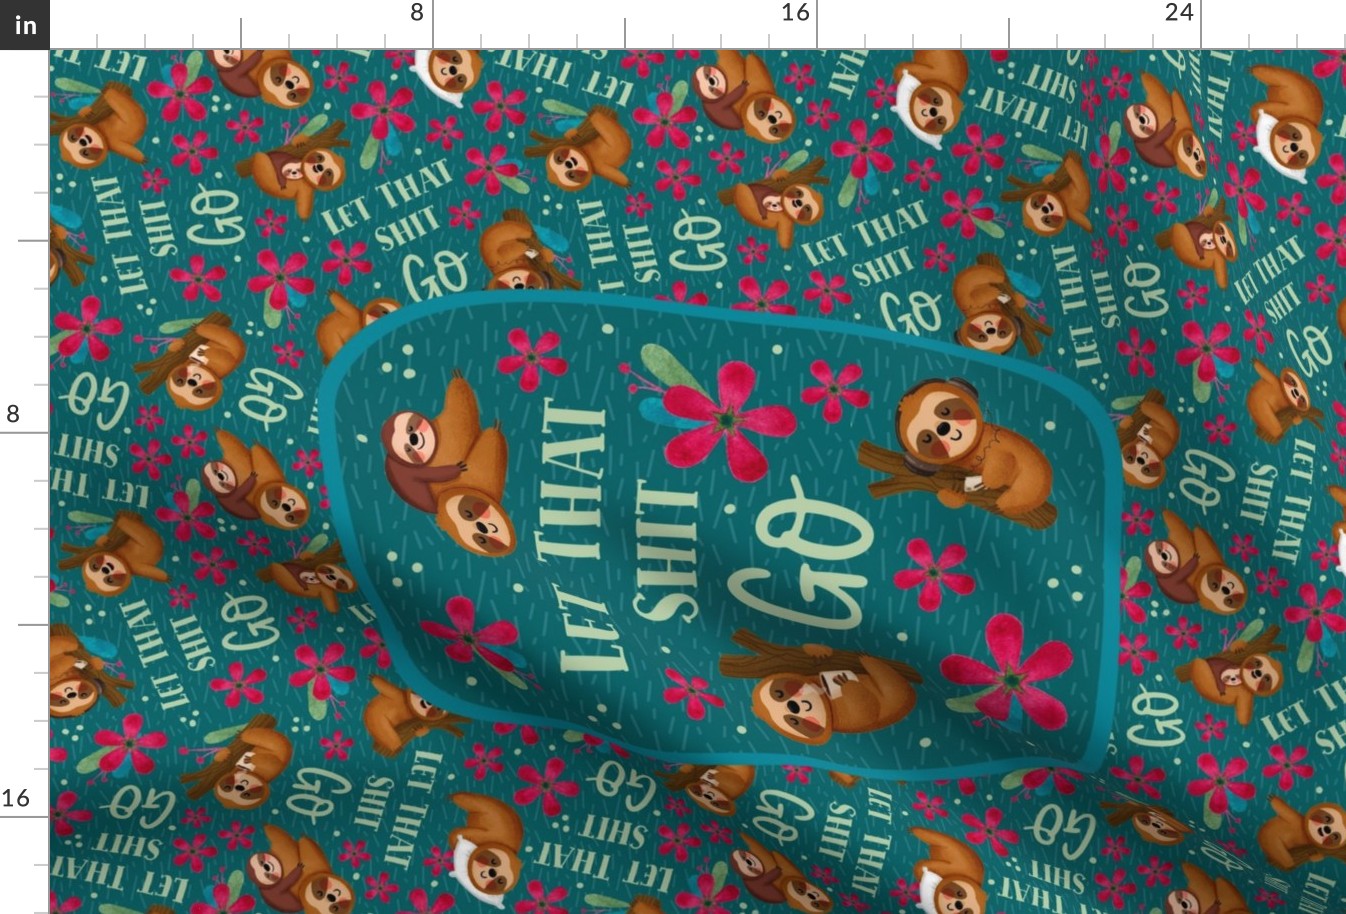 Large 27x18 Fat Quarter Panel Let That Shit Go Sloths Sarcastic Sweary Adult Humor for Wall Hanging or Tea Towel